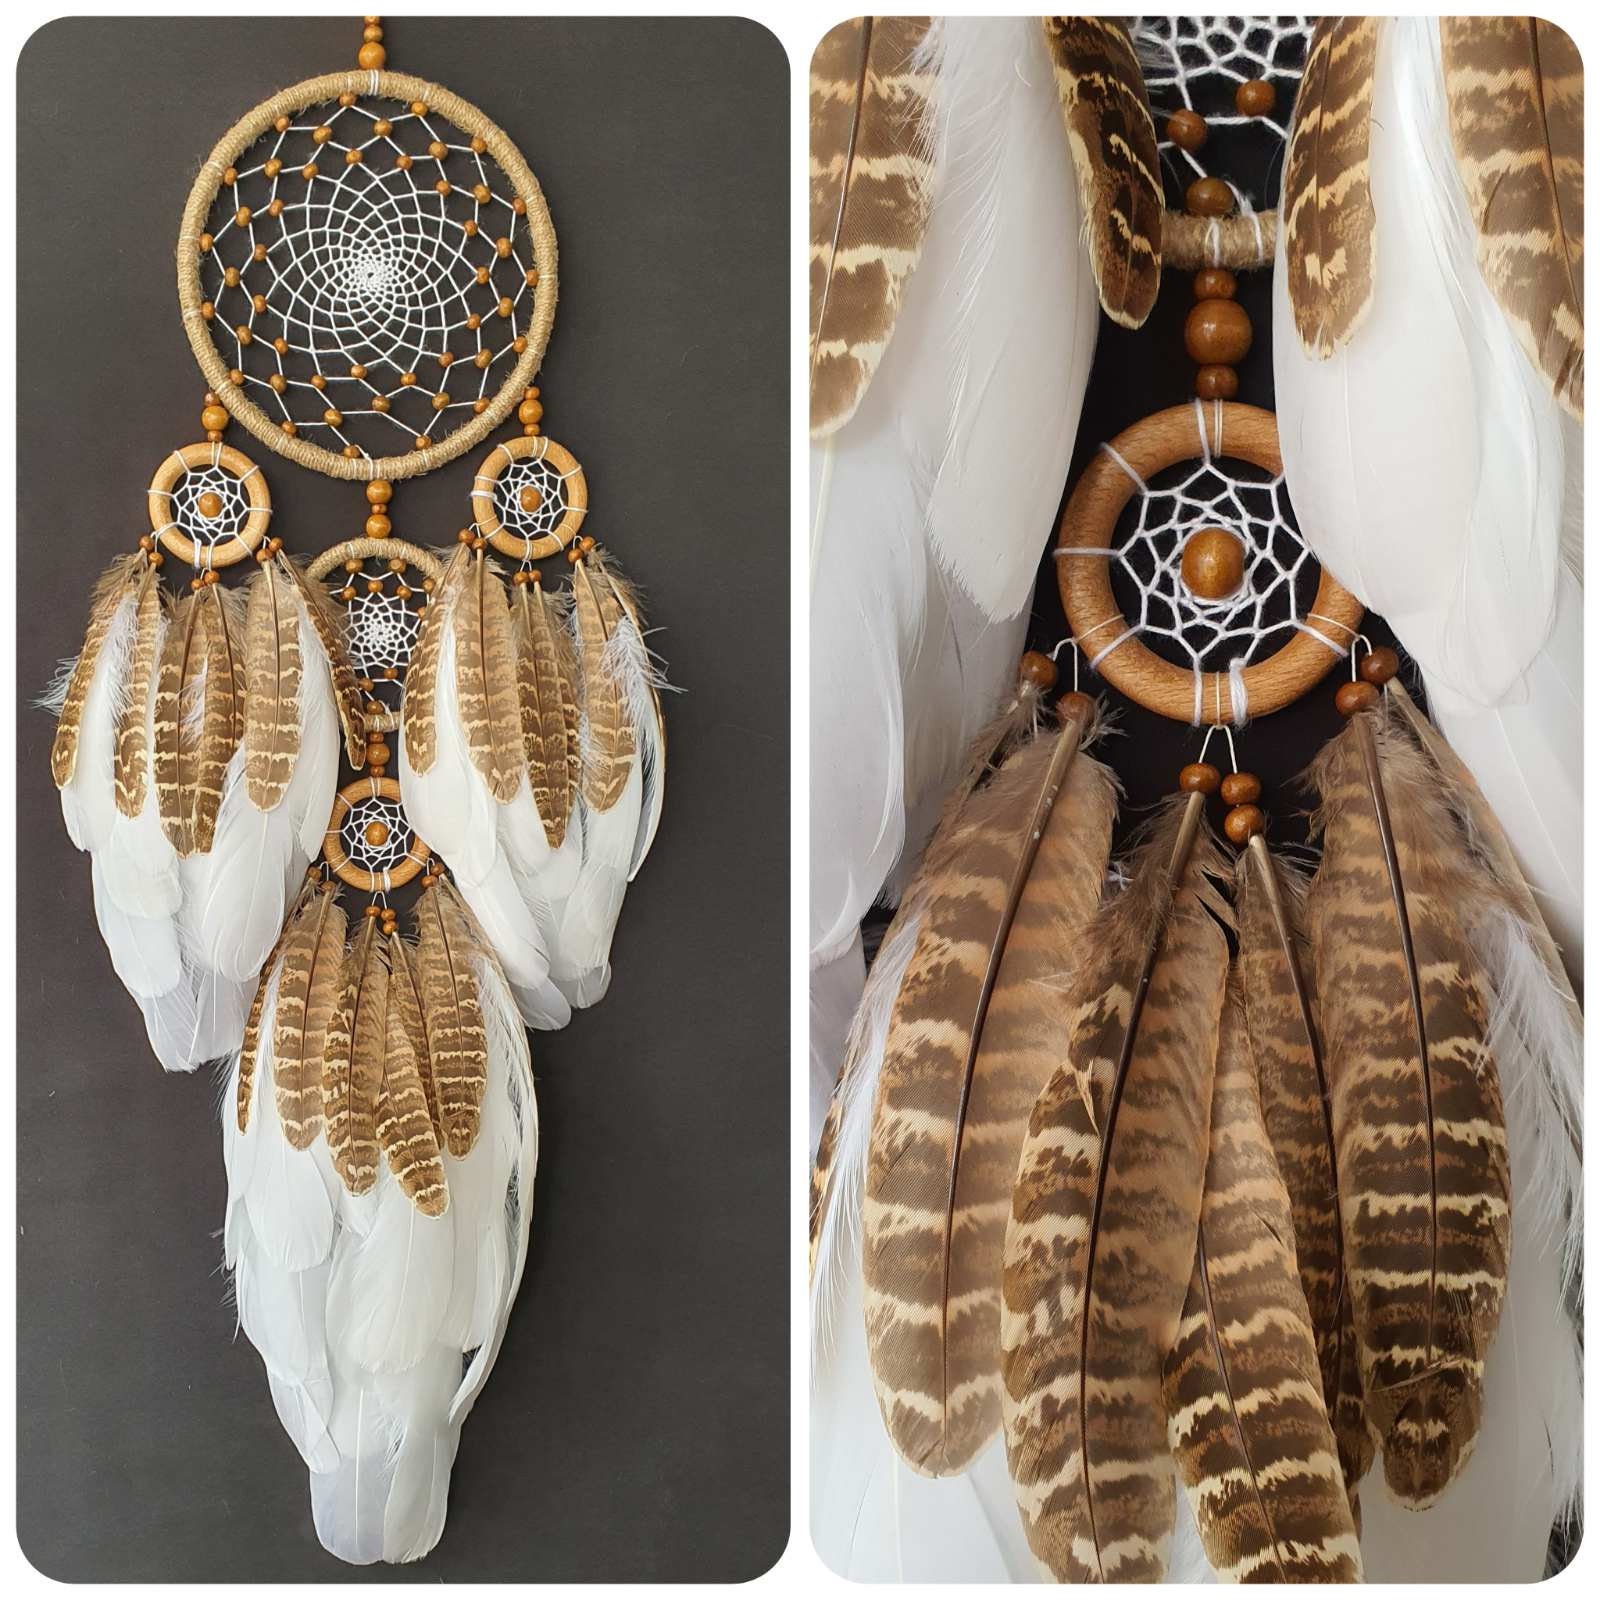 LARGE BROWN DREAM CATCHER 22 x 50cm TRADITIONAL STYLE APACHE